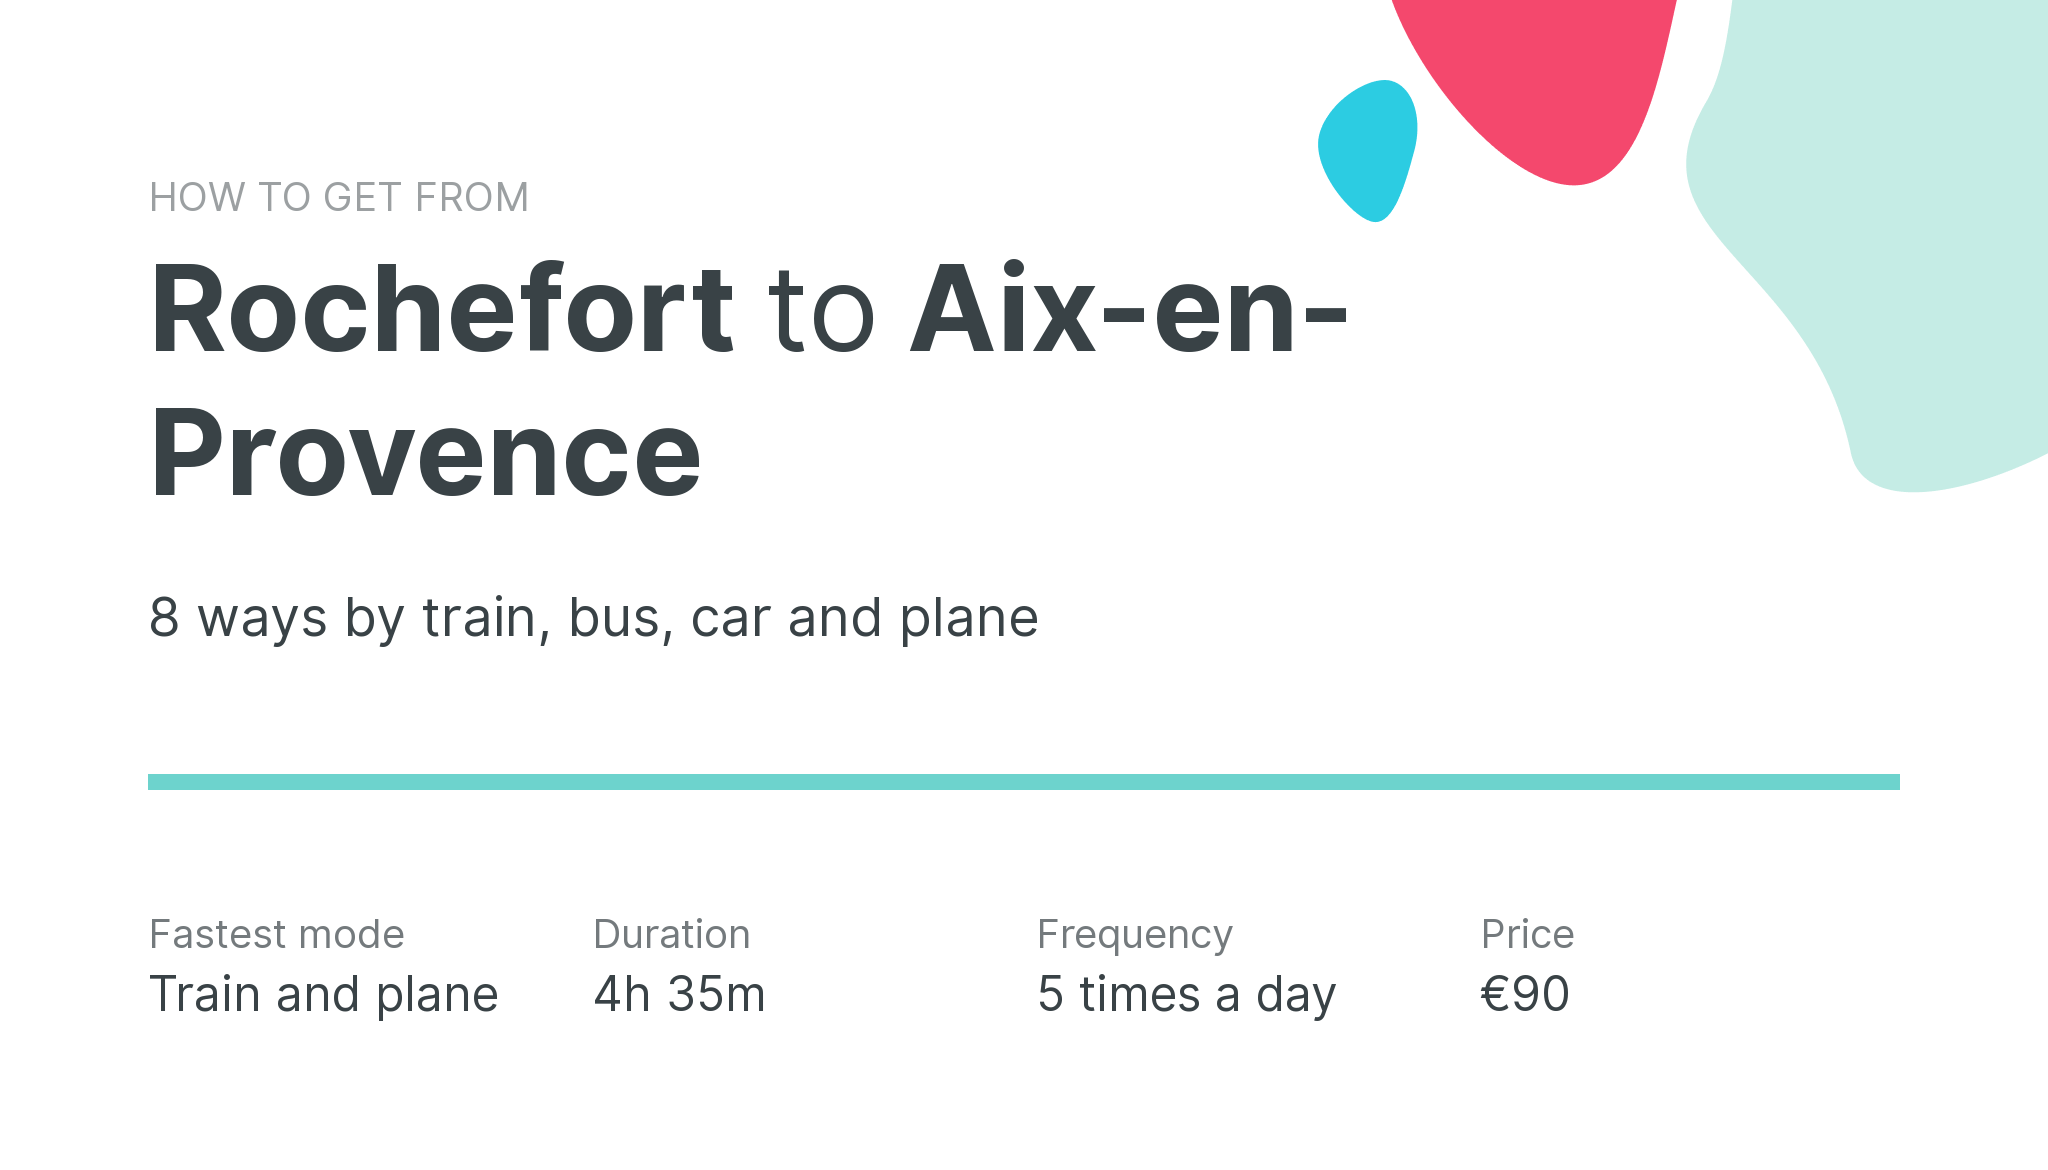 How do I get from Rochefort to Aix-en-Provence